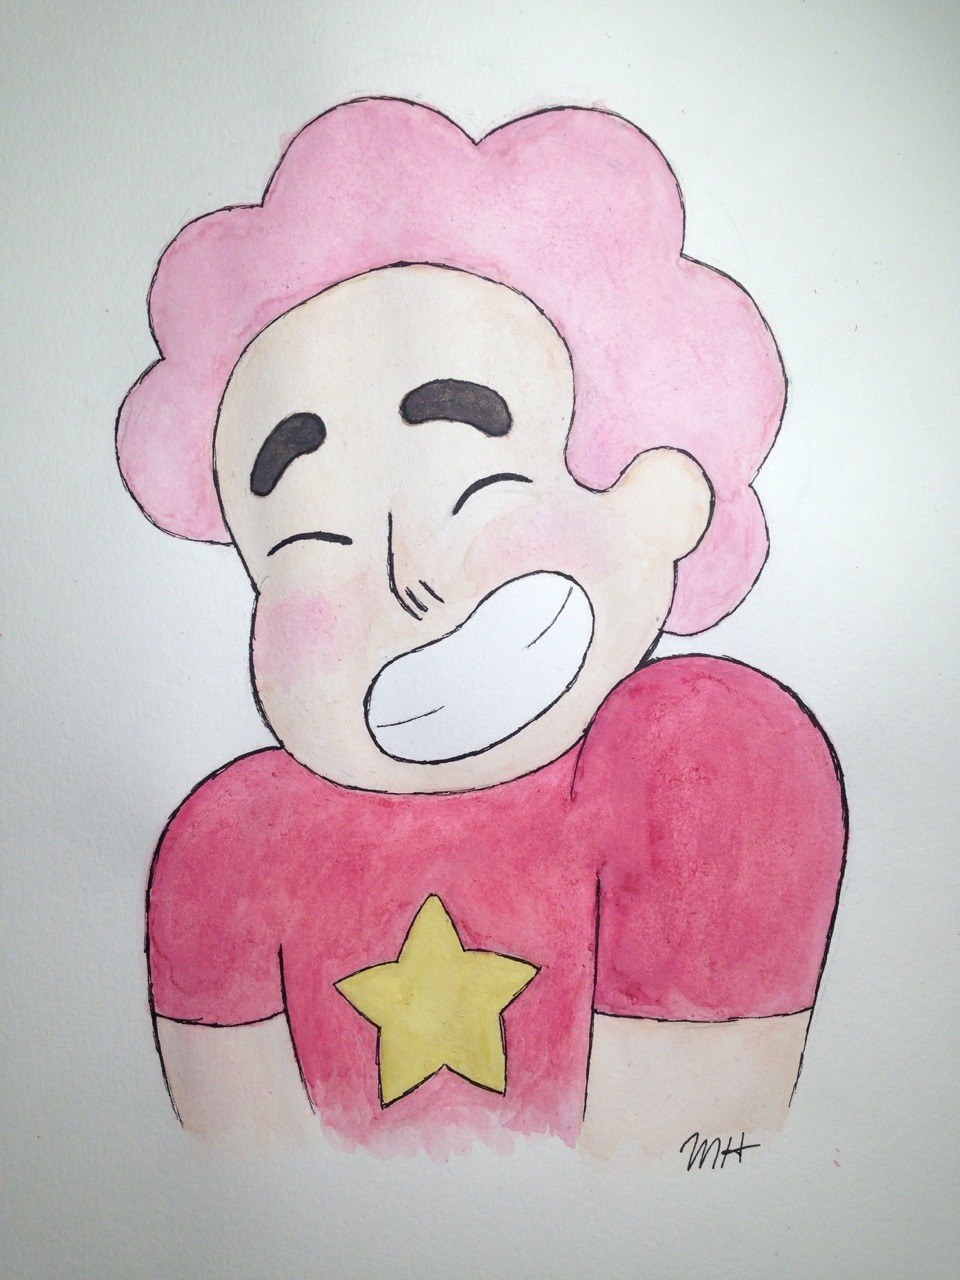 Just a little watercolor I did cause I love pink-haired Steven 😊💖